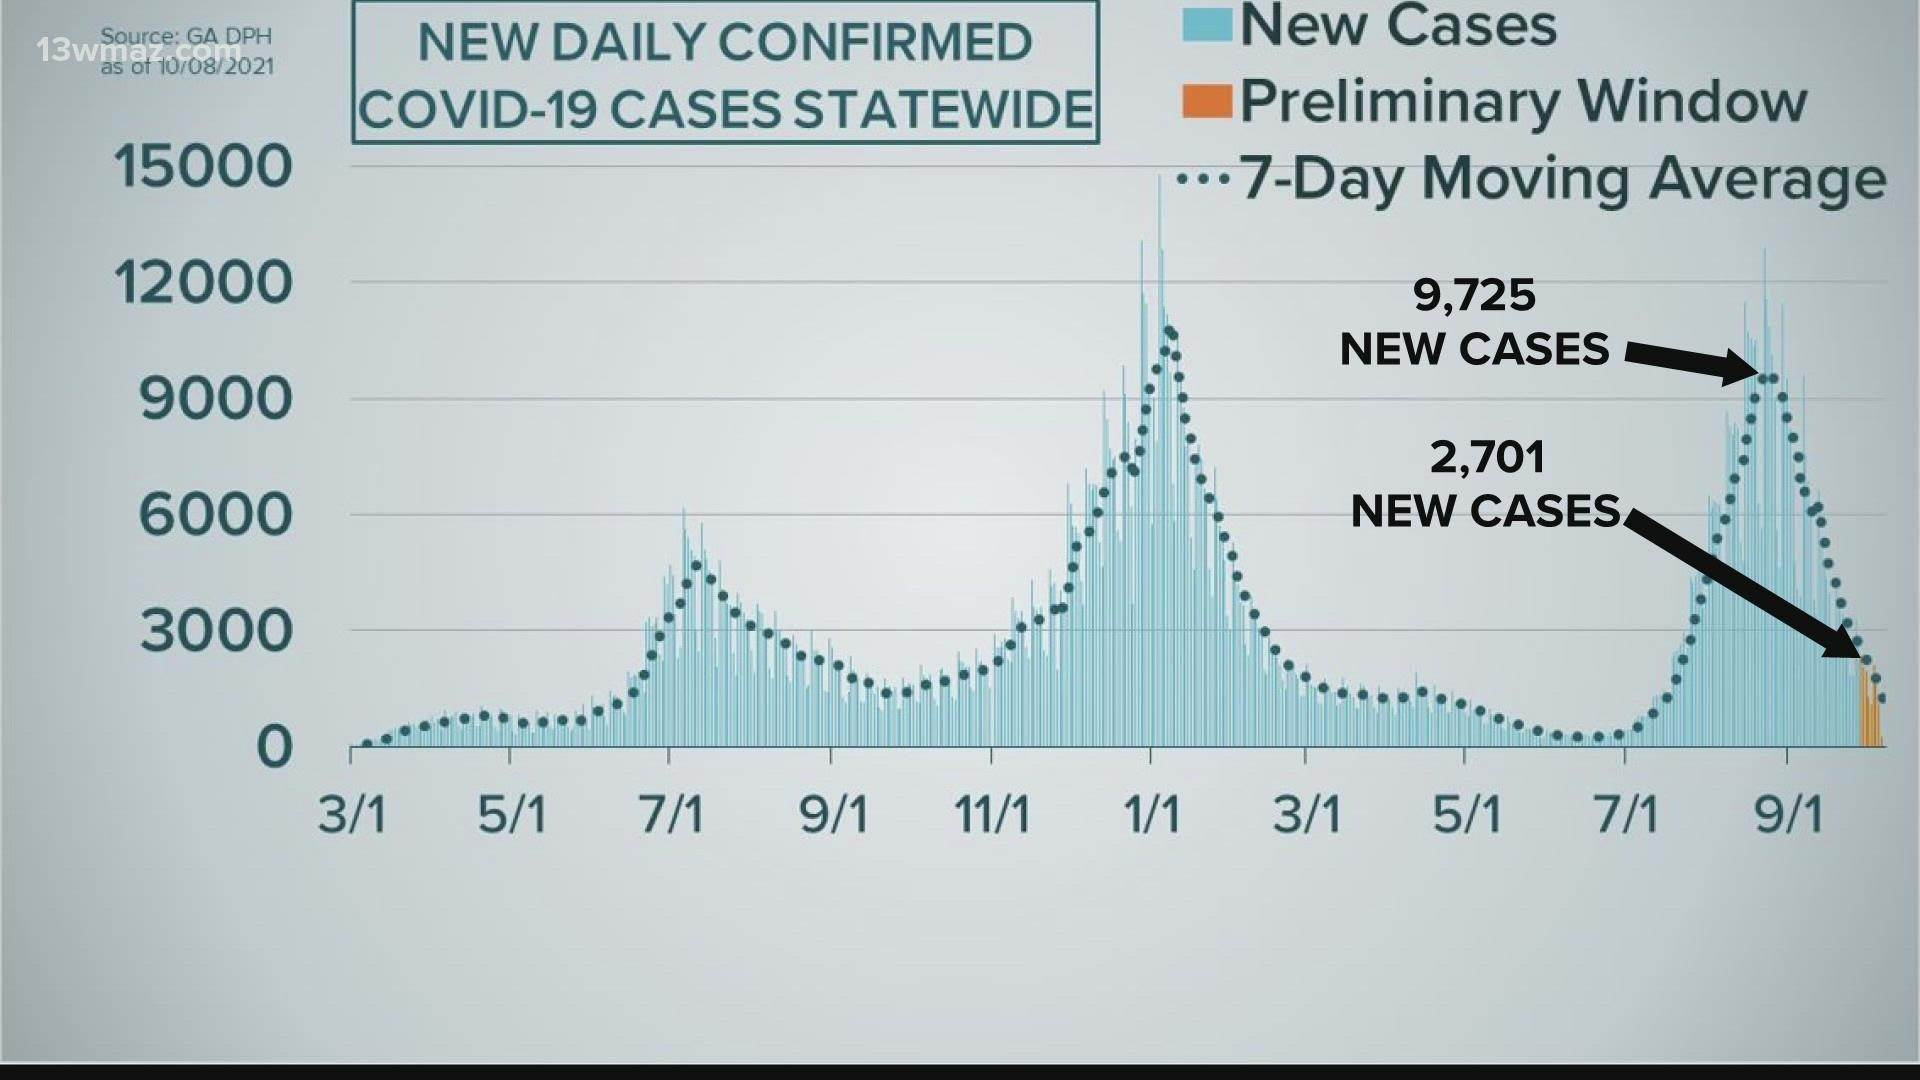 While cases continue to fall, numbers have not reached levels reported before the latest surge.